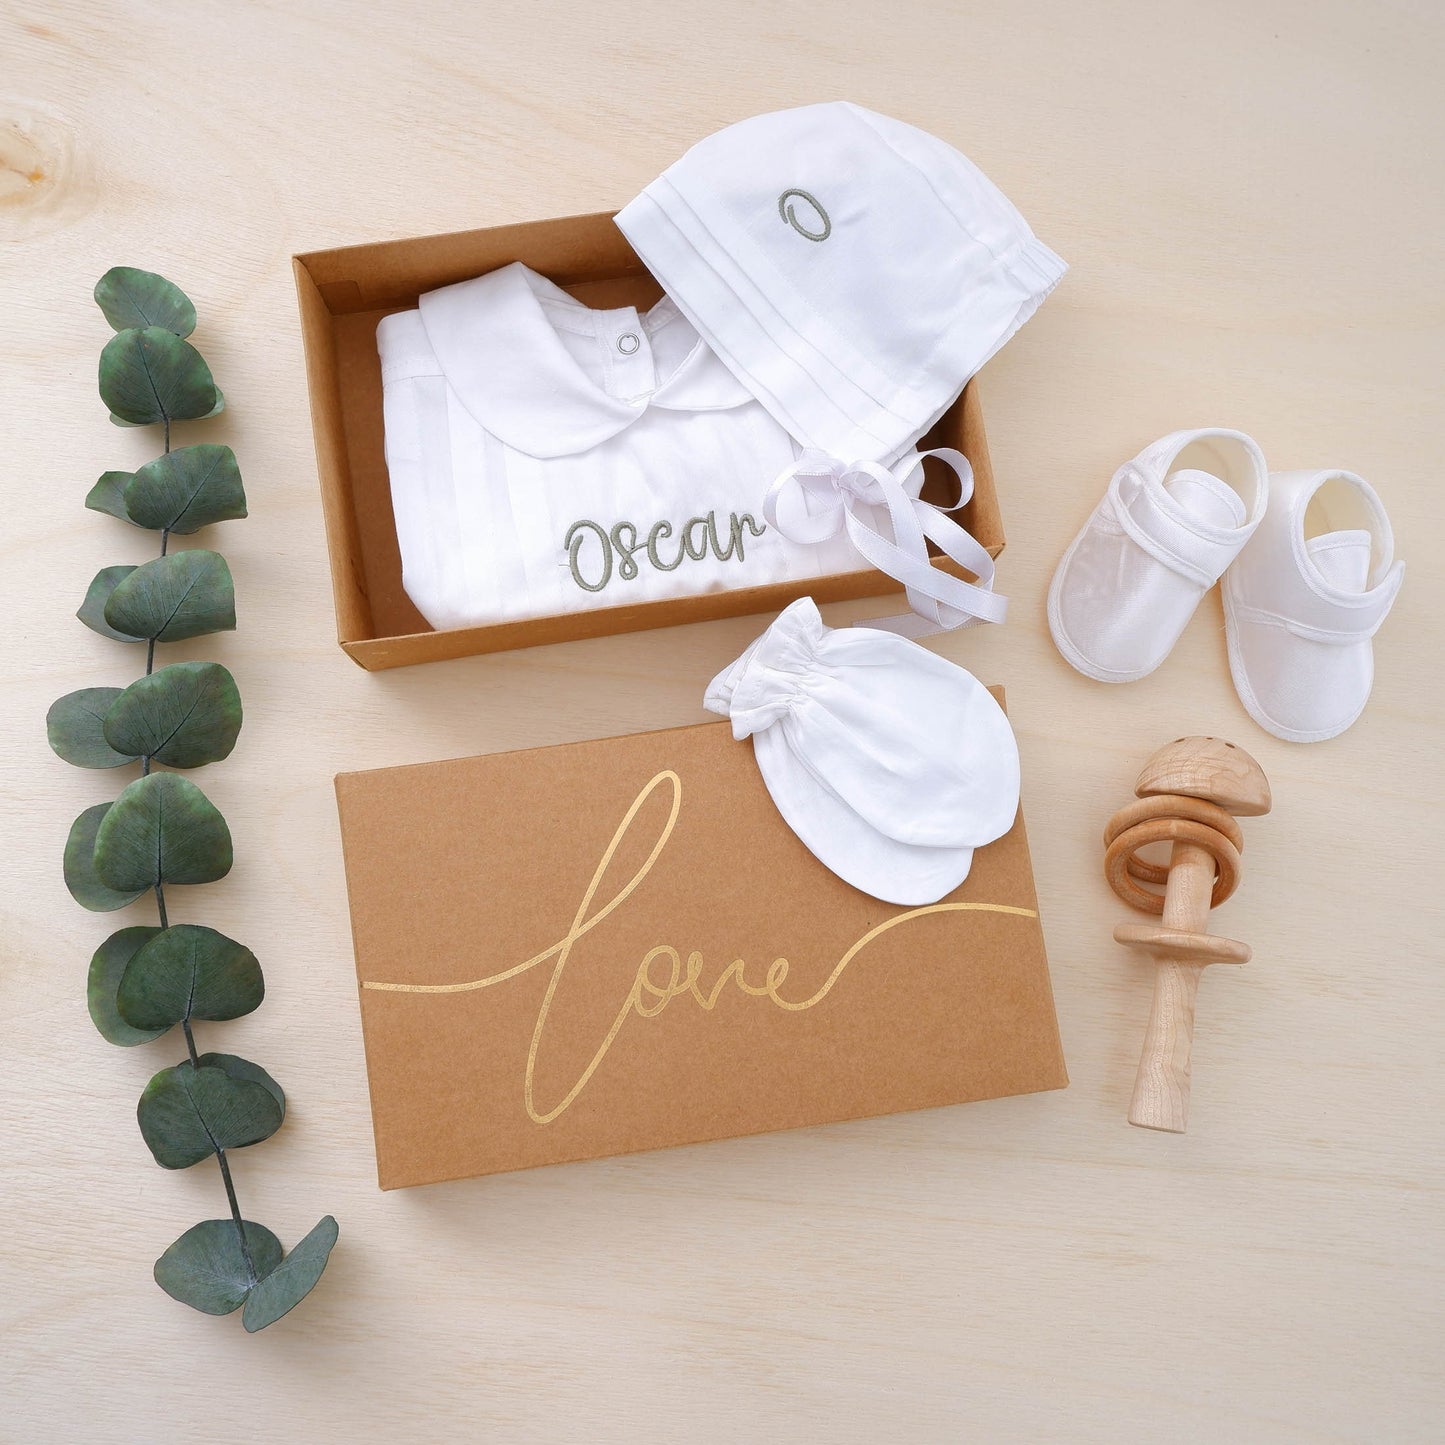 Personalisiertes Coming-Home-Outfit, Baby-Jungen-Coming-Home-Outfit, personalisiertes Geschenk für Neugeborene, individuelles Baby-Jungen-Krankenhaus-Outfit